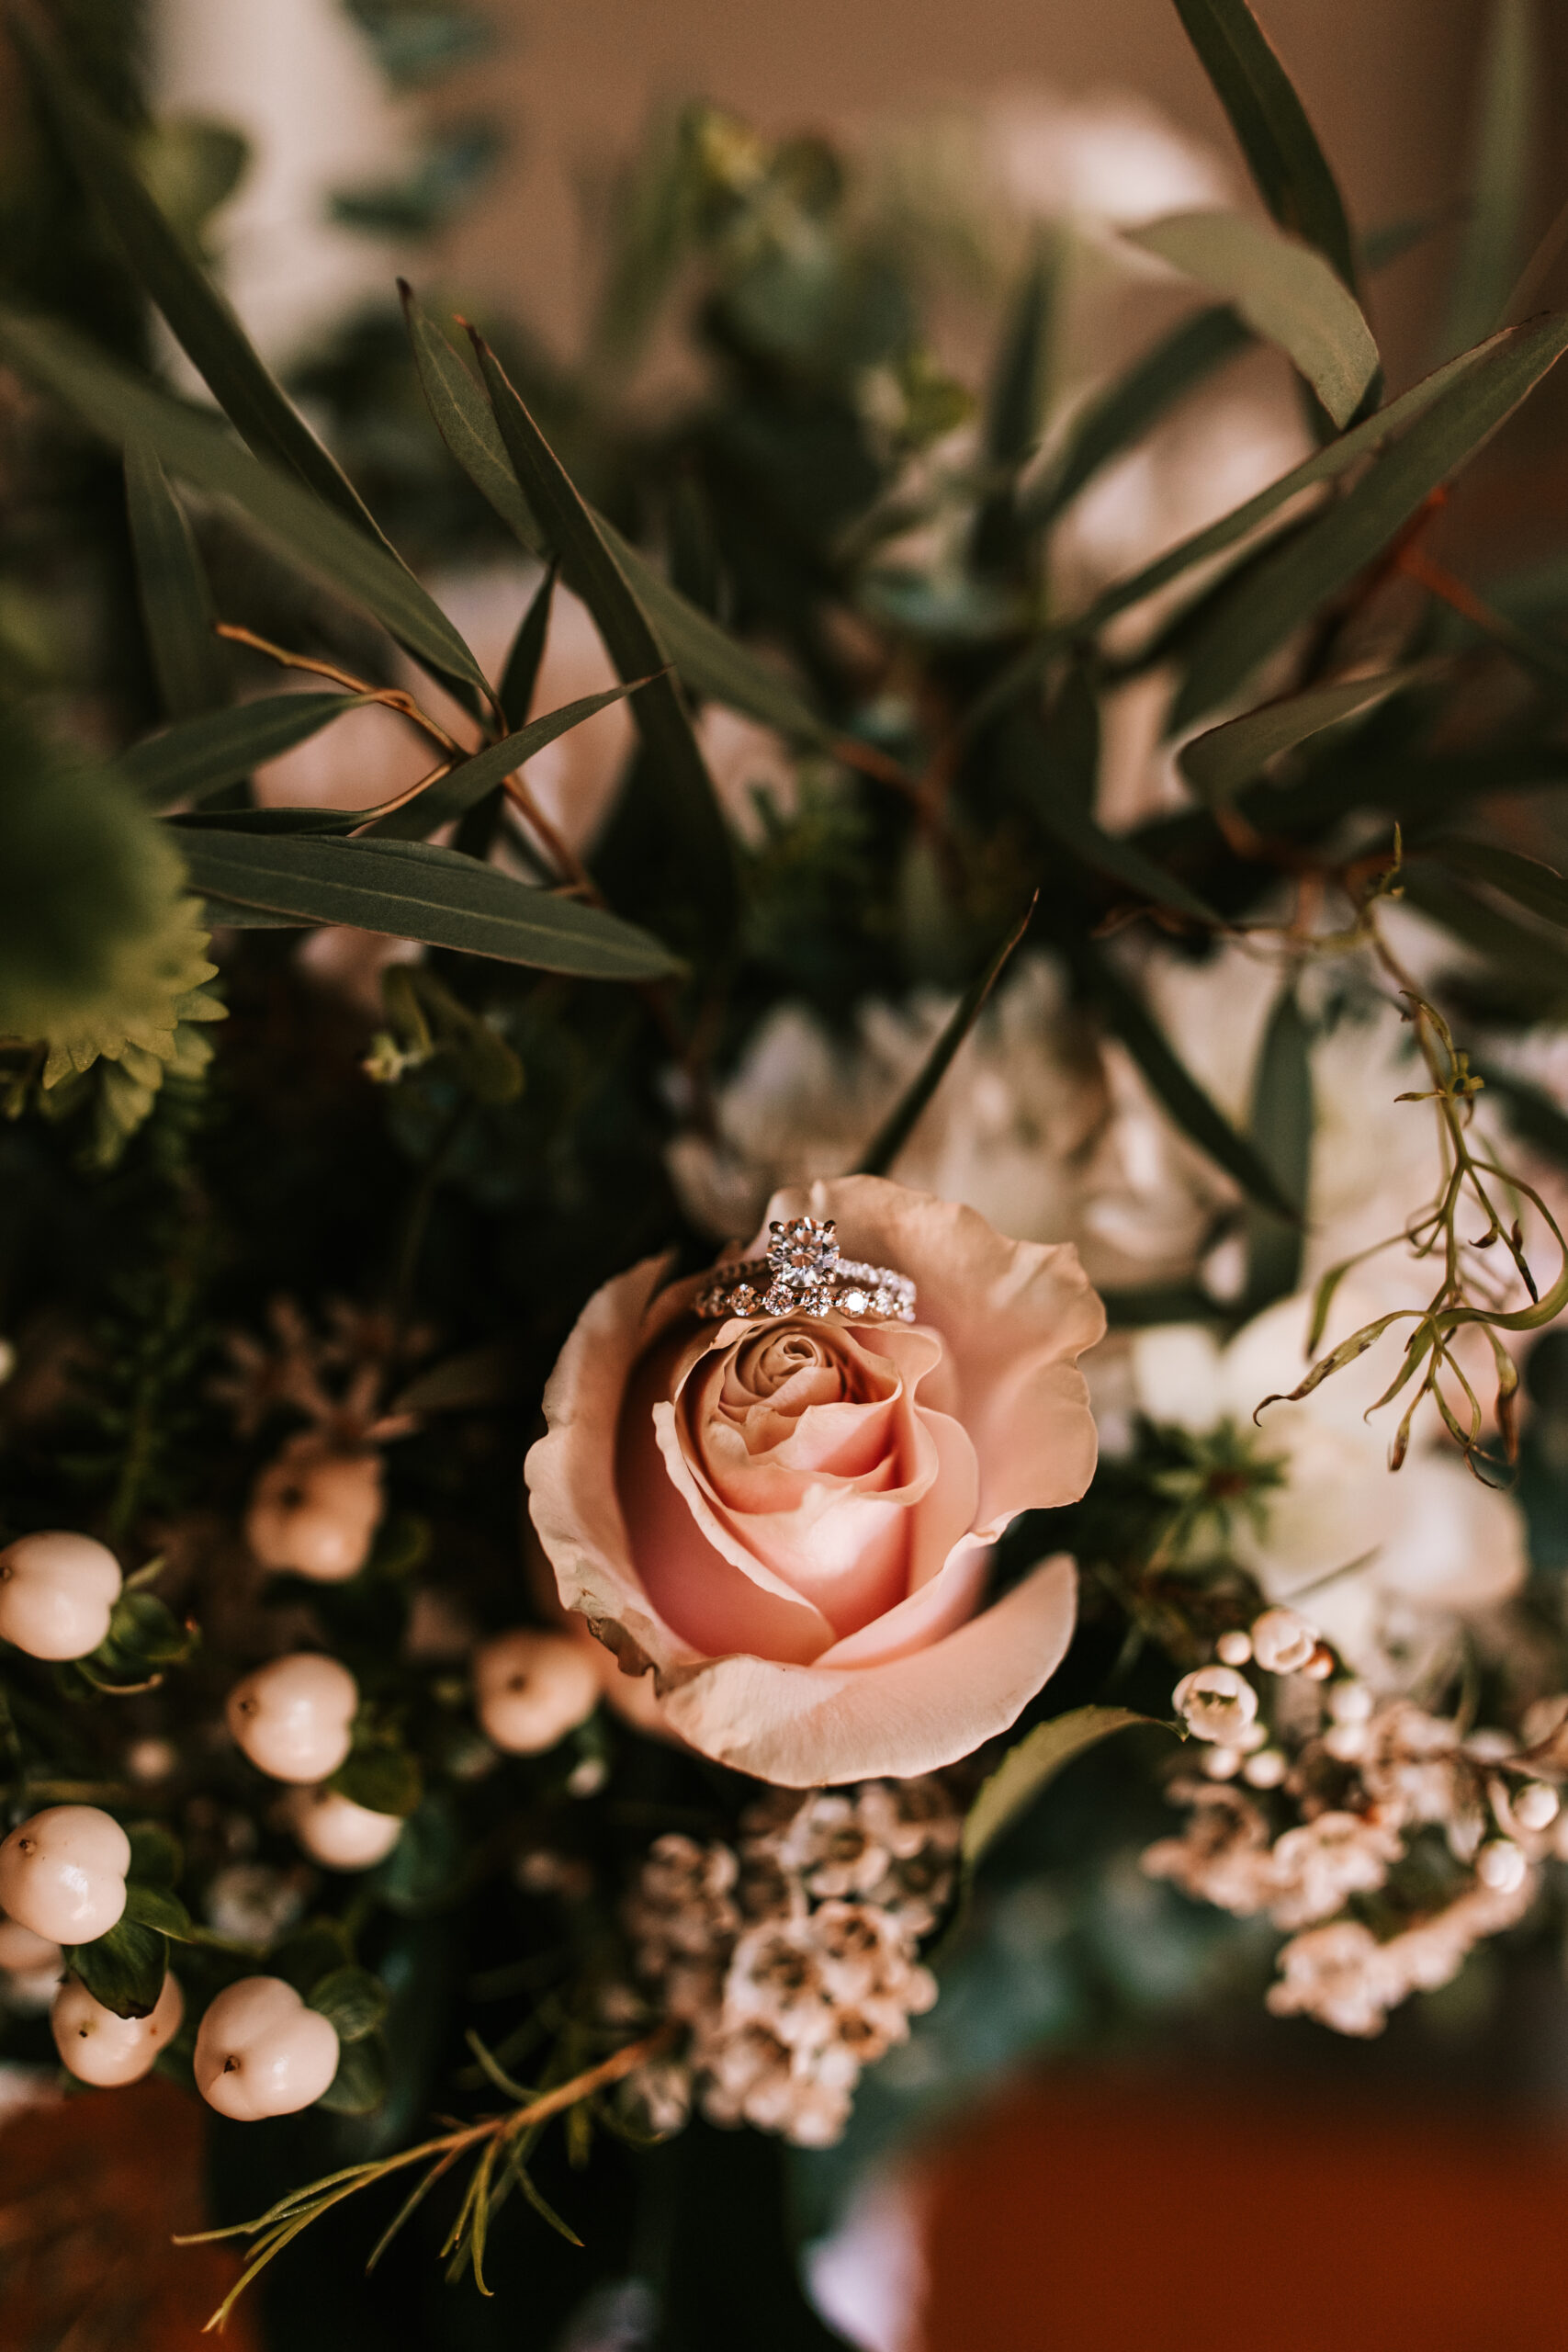 Diamond wedding ring resting on a peach rose in a bridal bouquet photographed by Bailey Morris Wedding Photography.